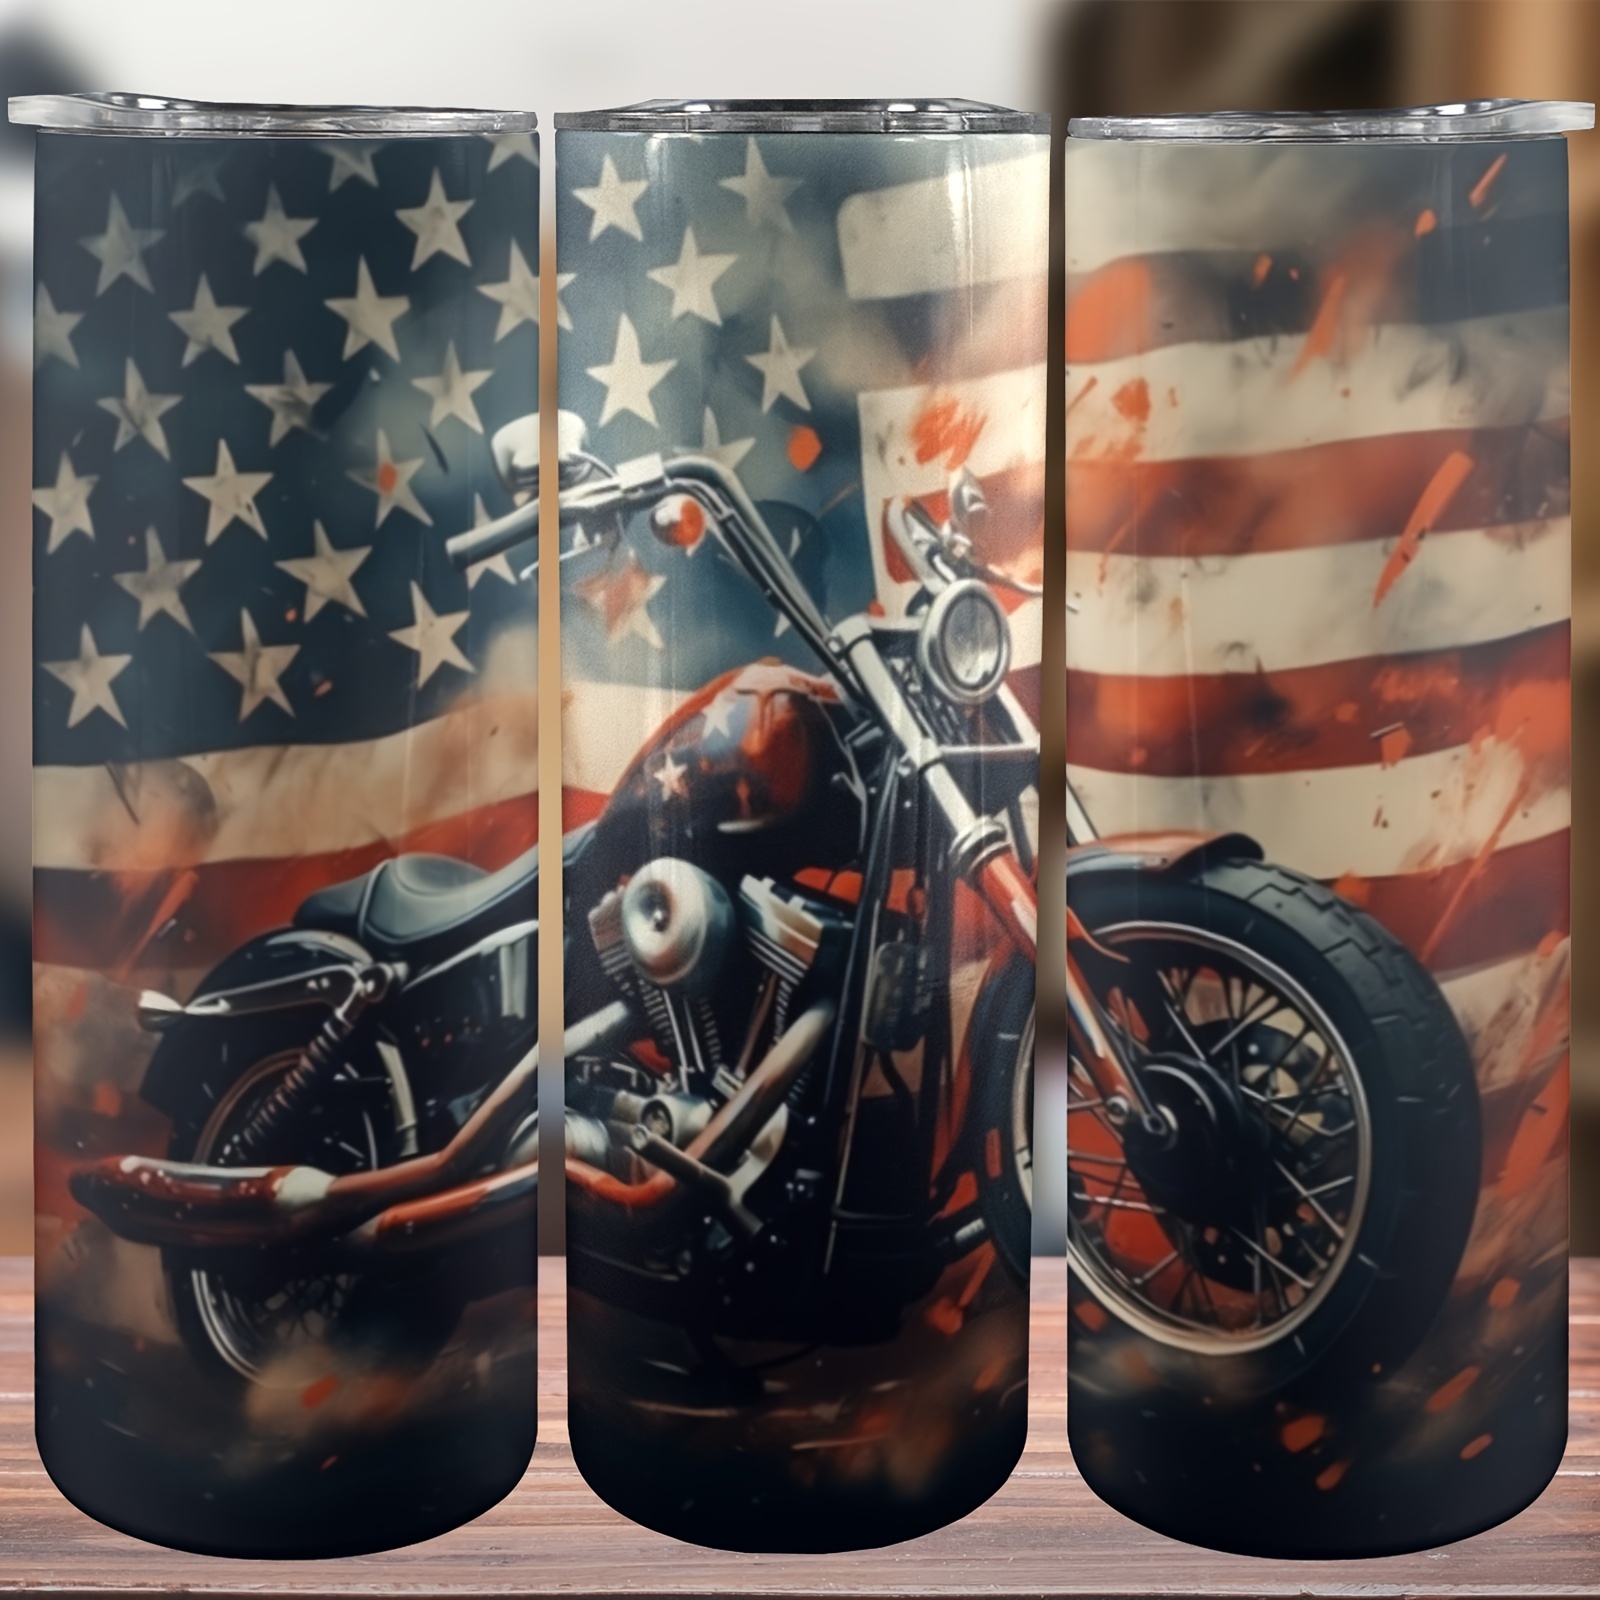 

20oz Patriotic American Flag & Motorcycle Insulated Stainless Steel Tumbler With Lid - Reusable, Double-walled Travel Coffee Mug For All Beverages